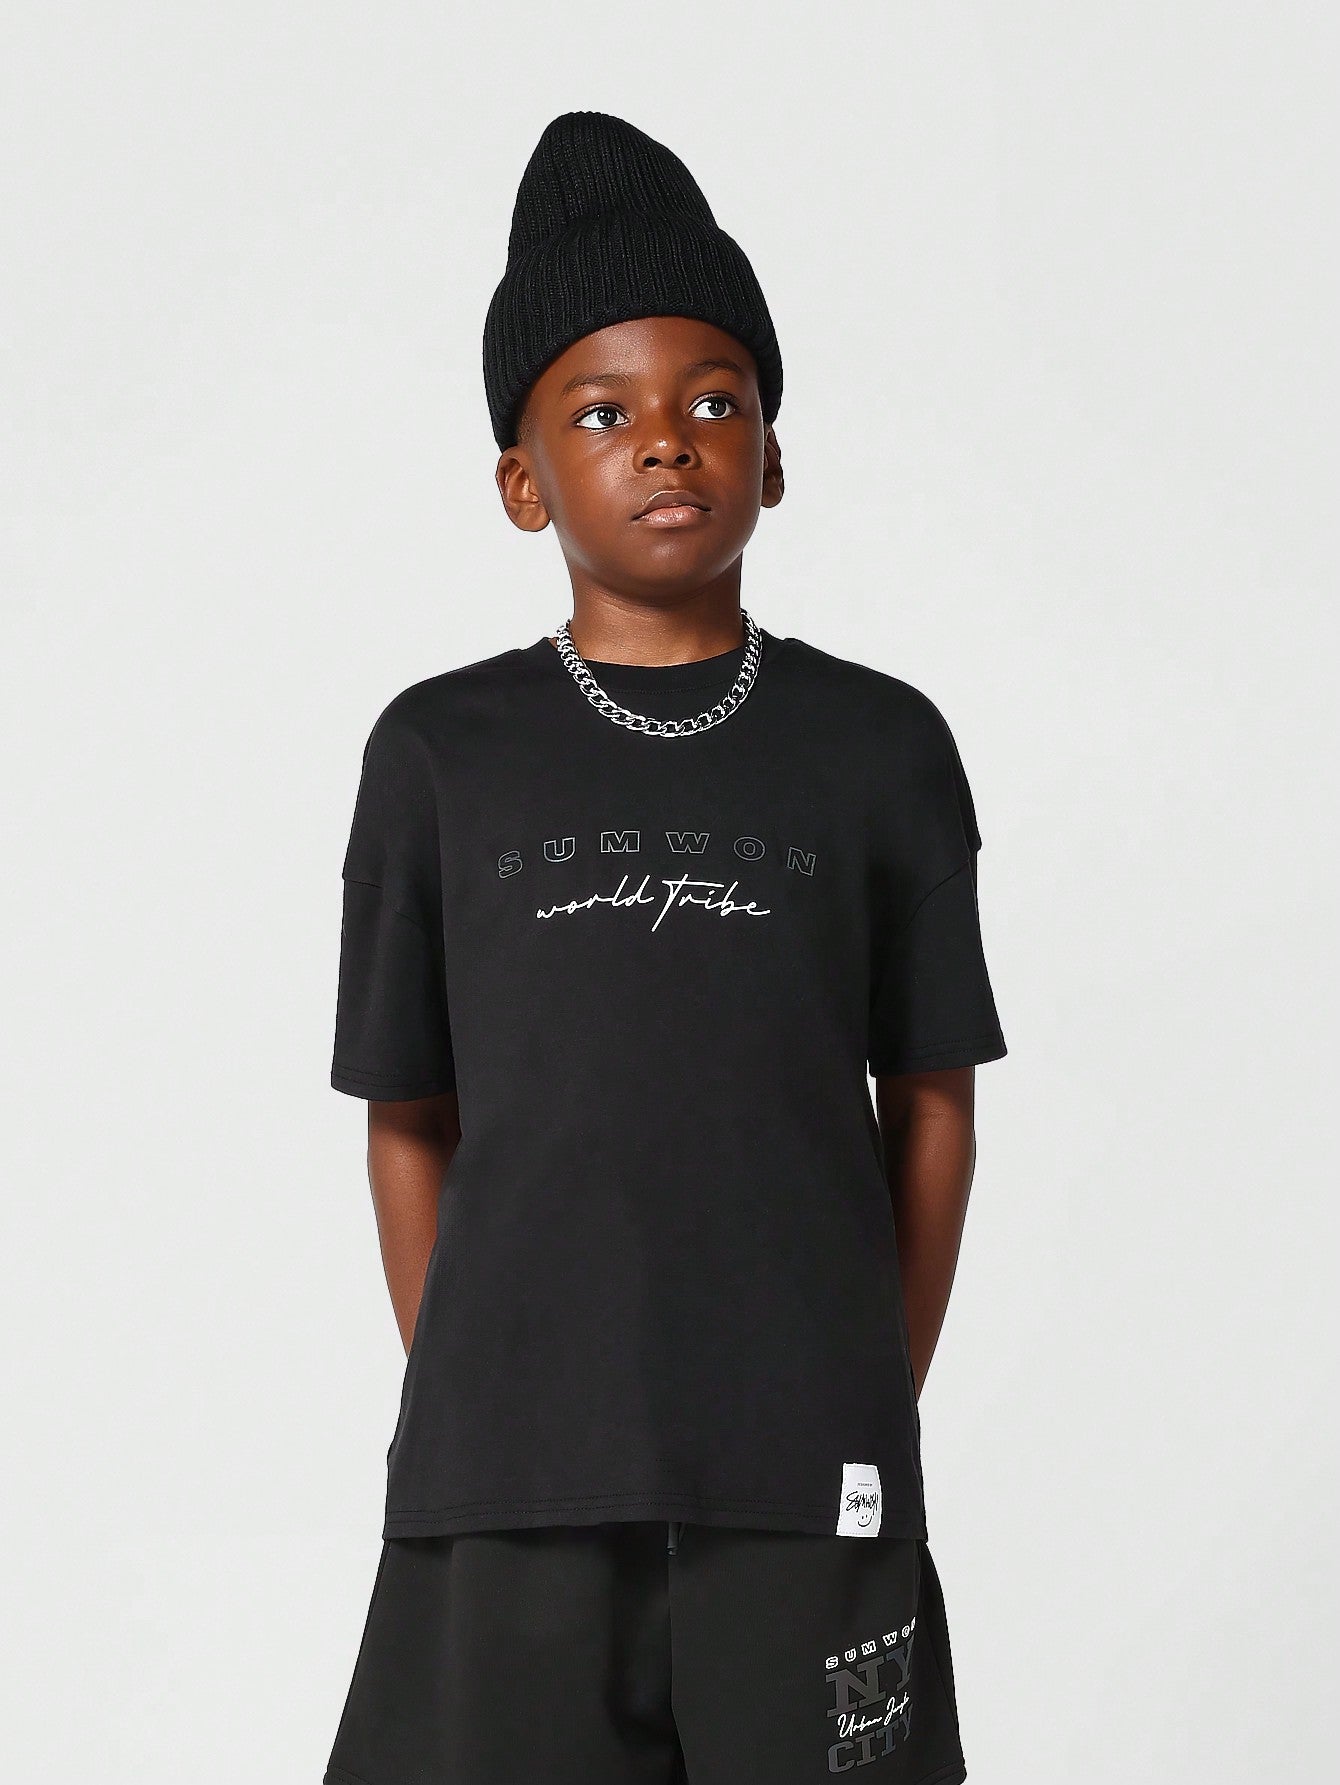 Kids Unisex Tee With Reflective NY Print Back To School